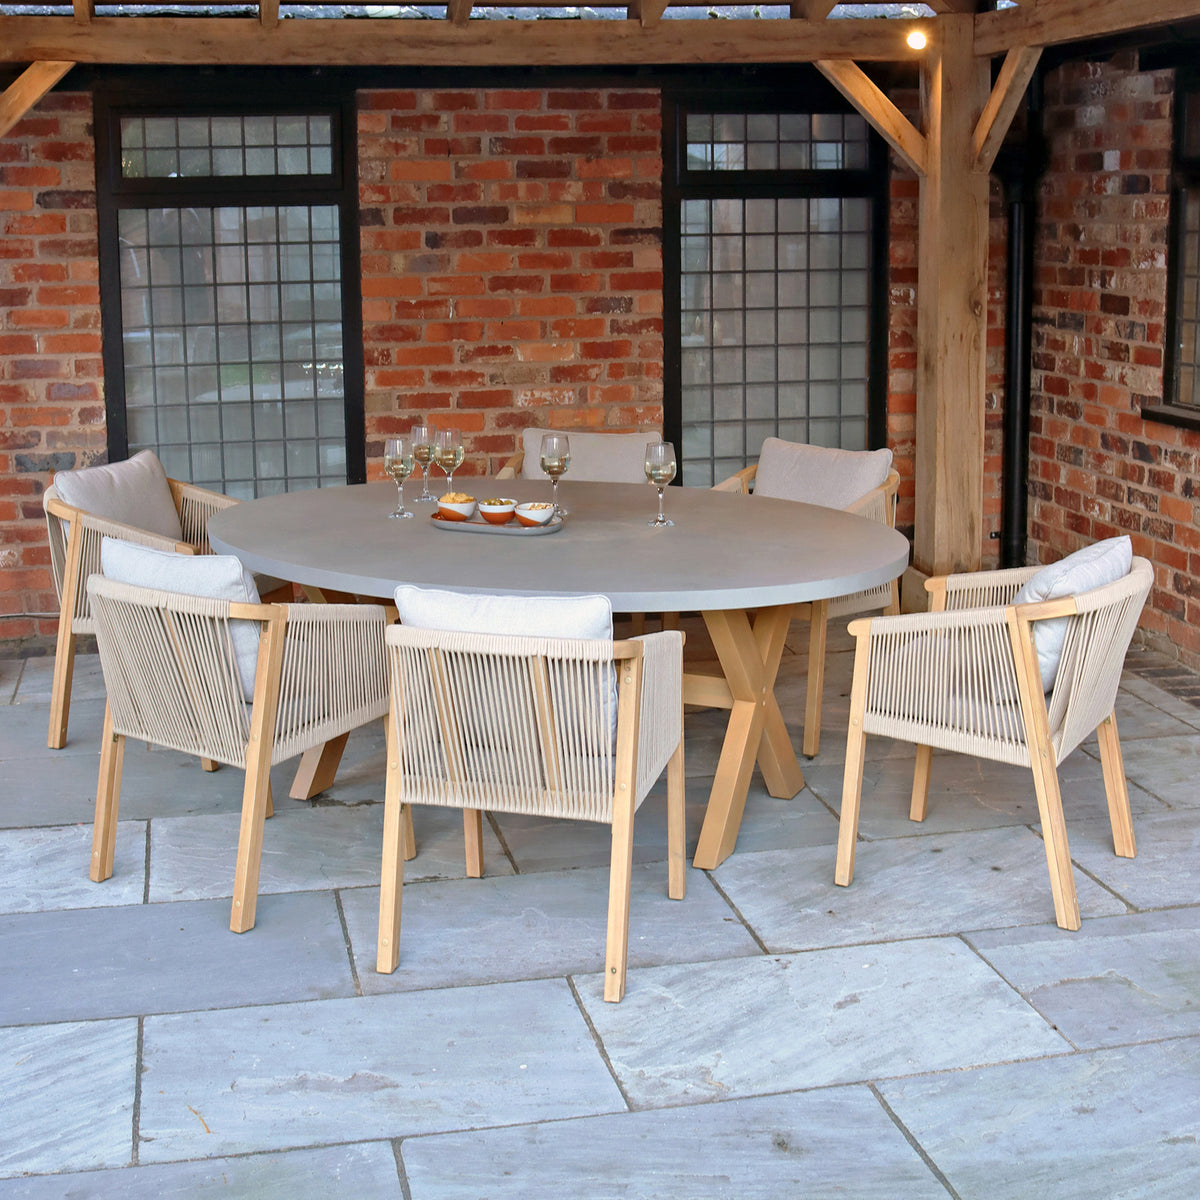 Luna 180cm x 130cm Ellipse Concrete Table Set with 6 Dining Chairs from Roseland Furniture